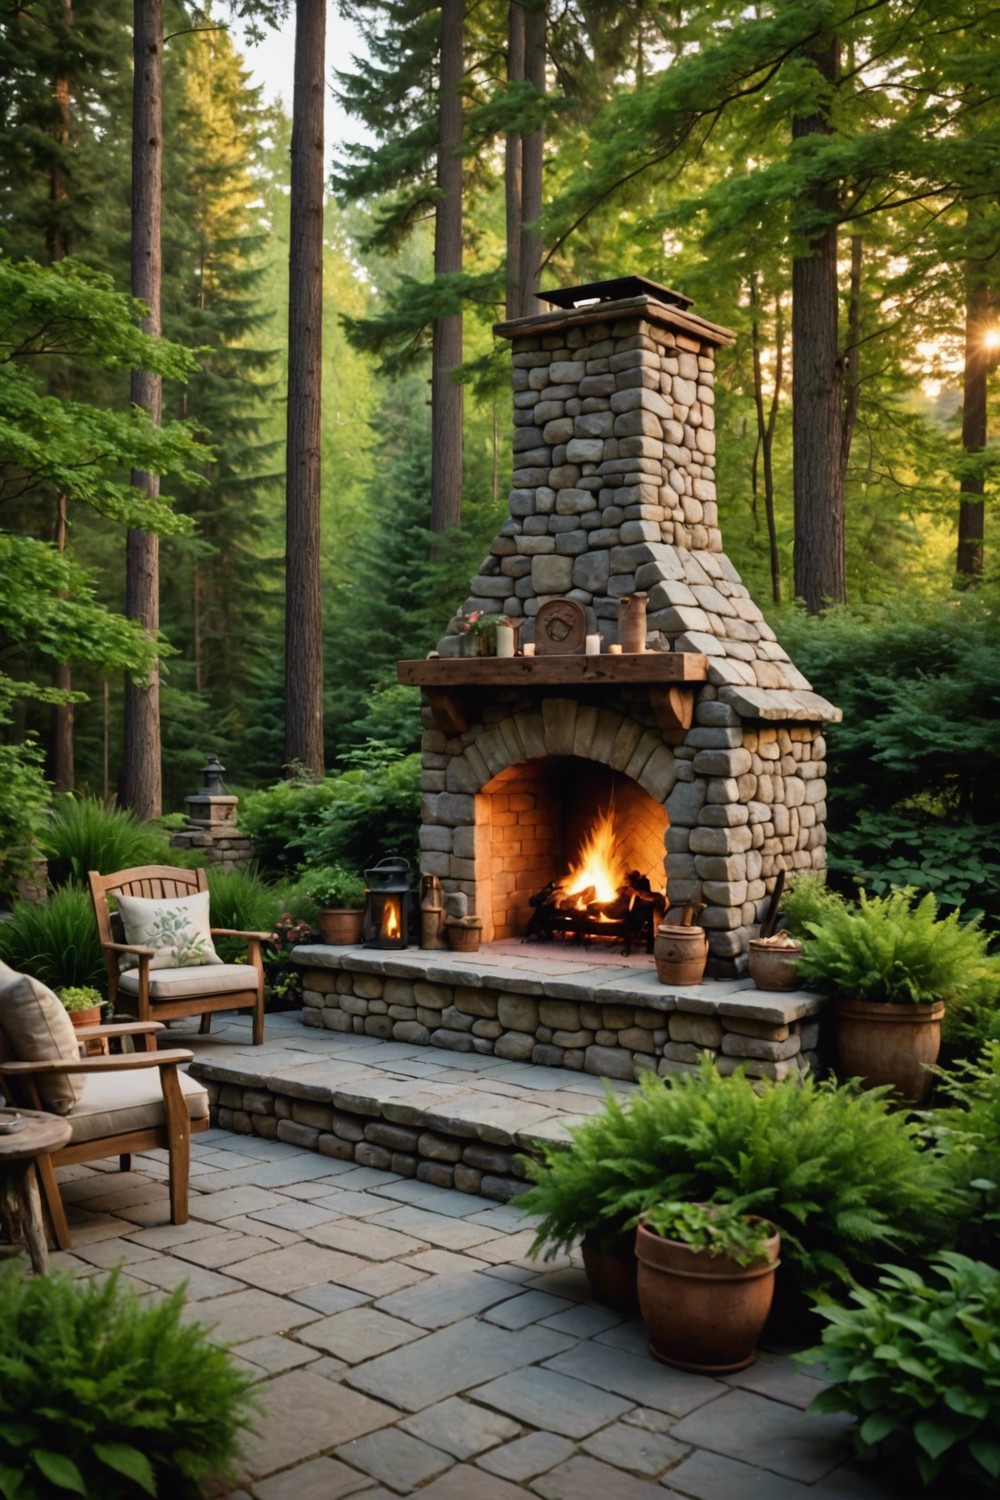 Country Cottage Fireplace: